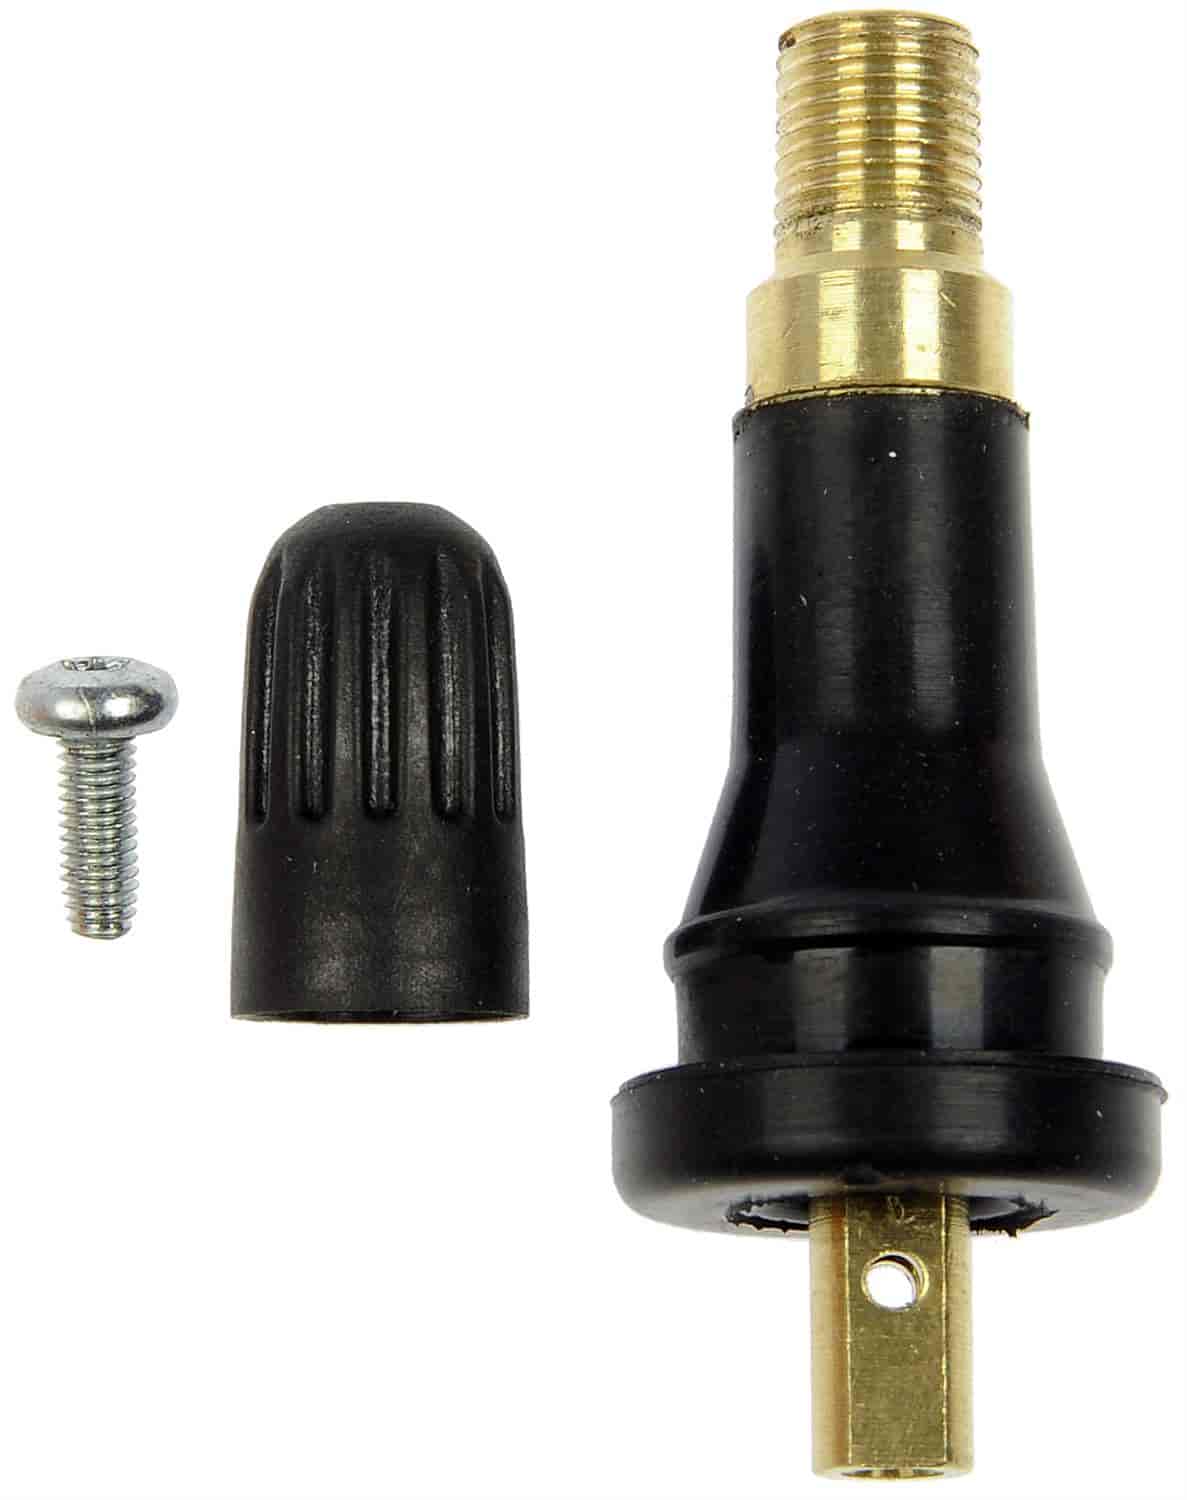 TPMS Service Kit Rubber Snap-In Valve Stem with T-10 Torx Screw